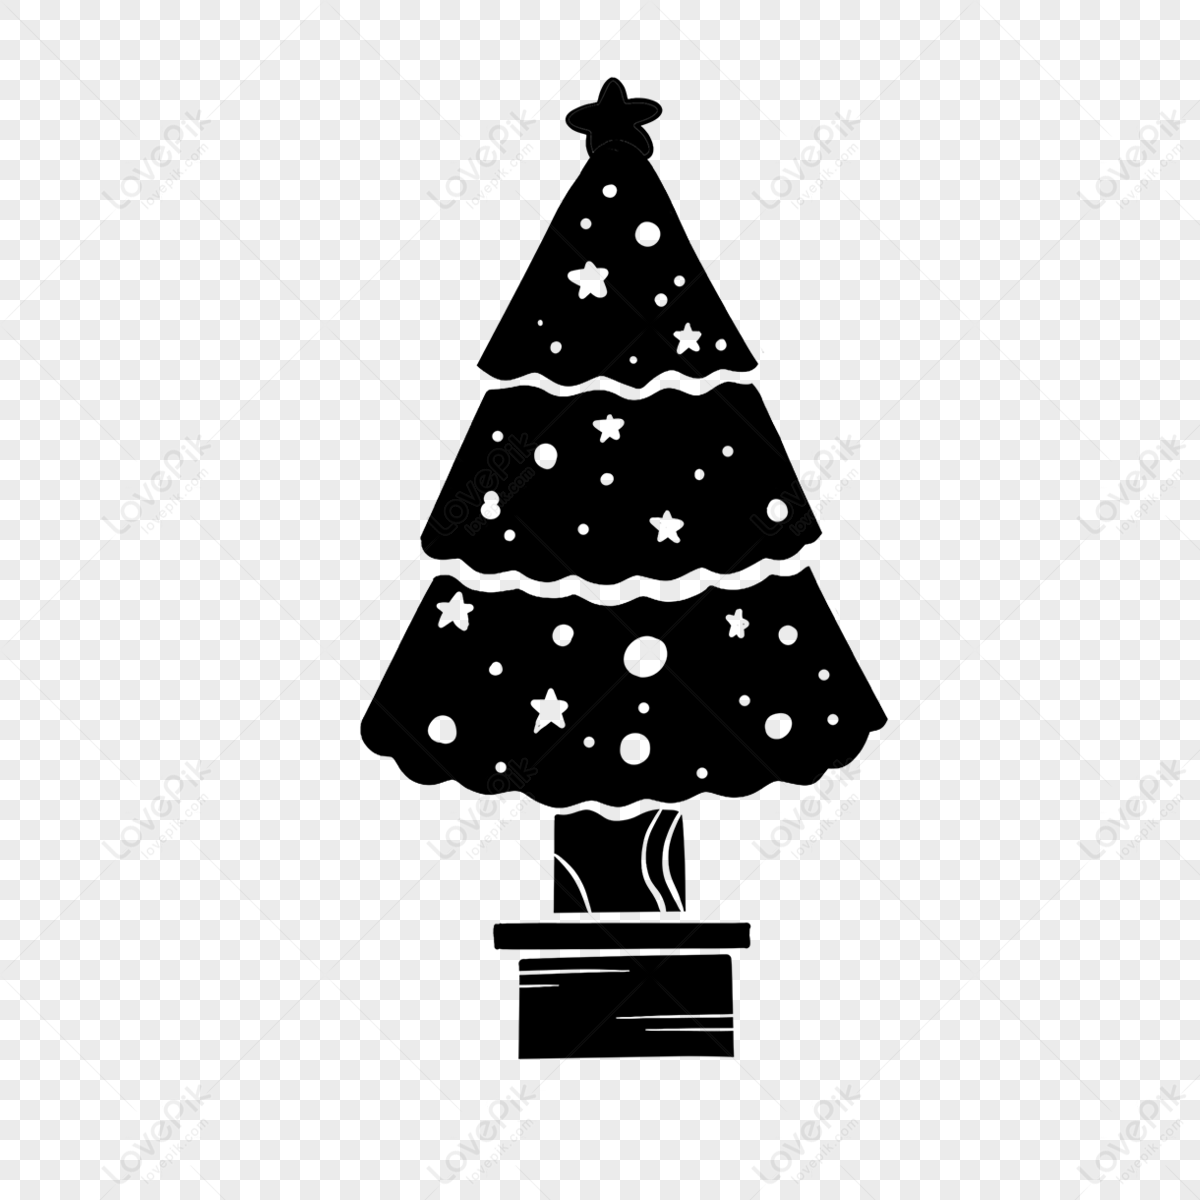 Christmas Tree Silhouette With Stars Flowerpot Clipart,christmas ...